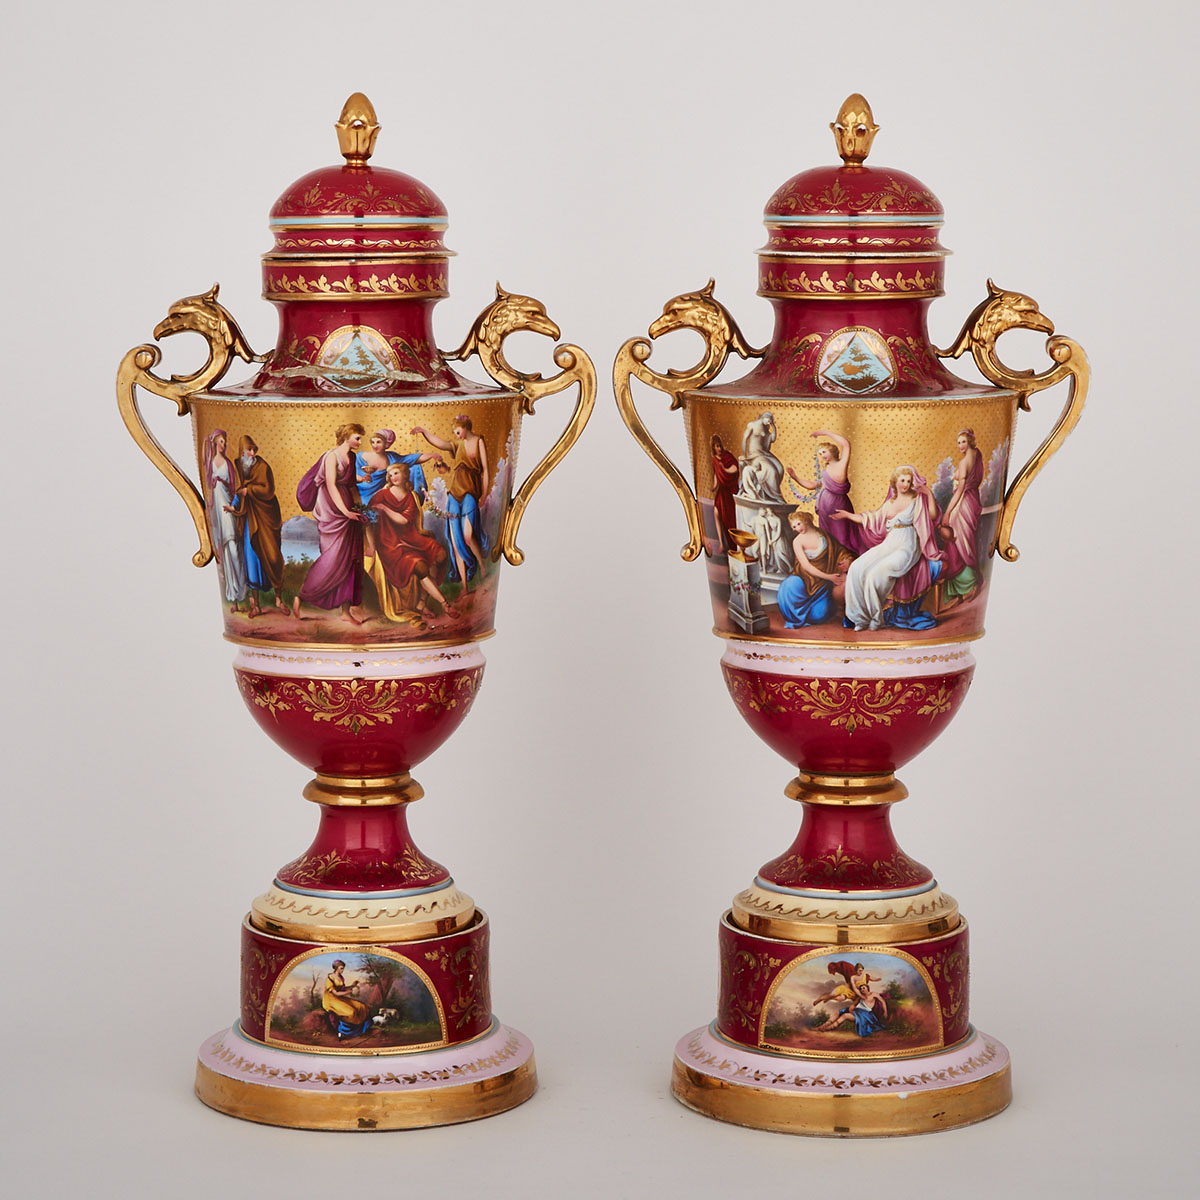 Pair of ‘Vienna’ Large Two Handled Covered Vases and Stands, late 19th century